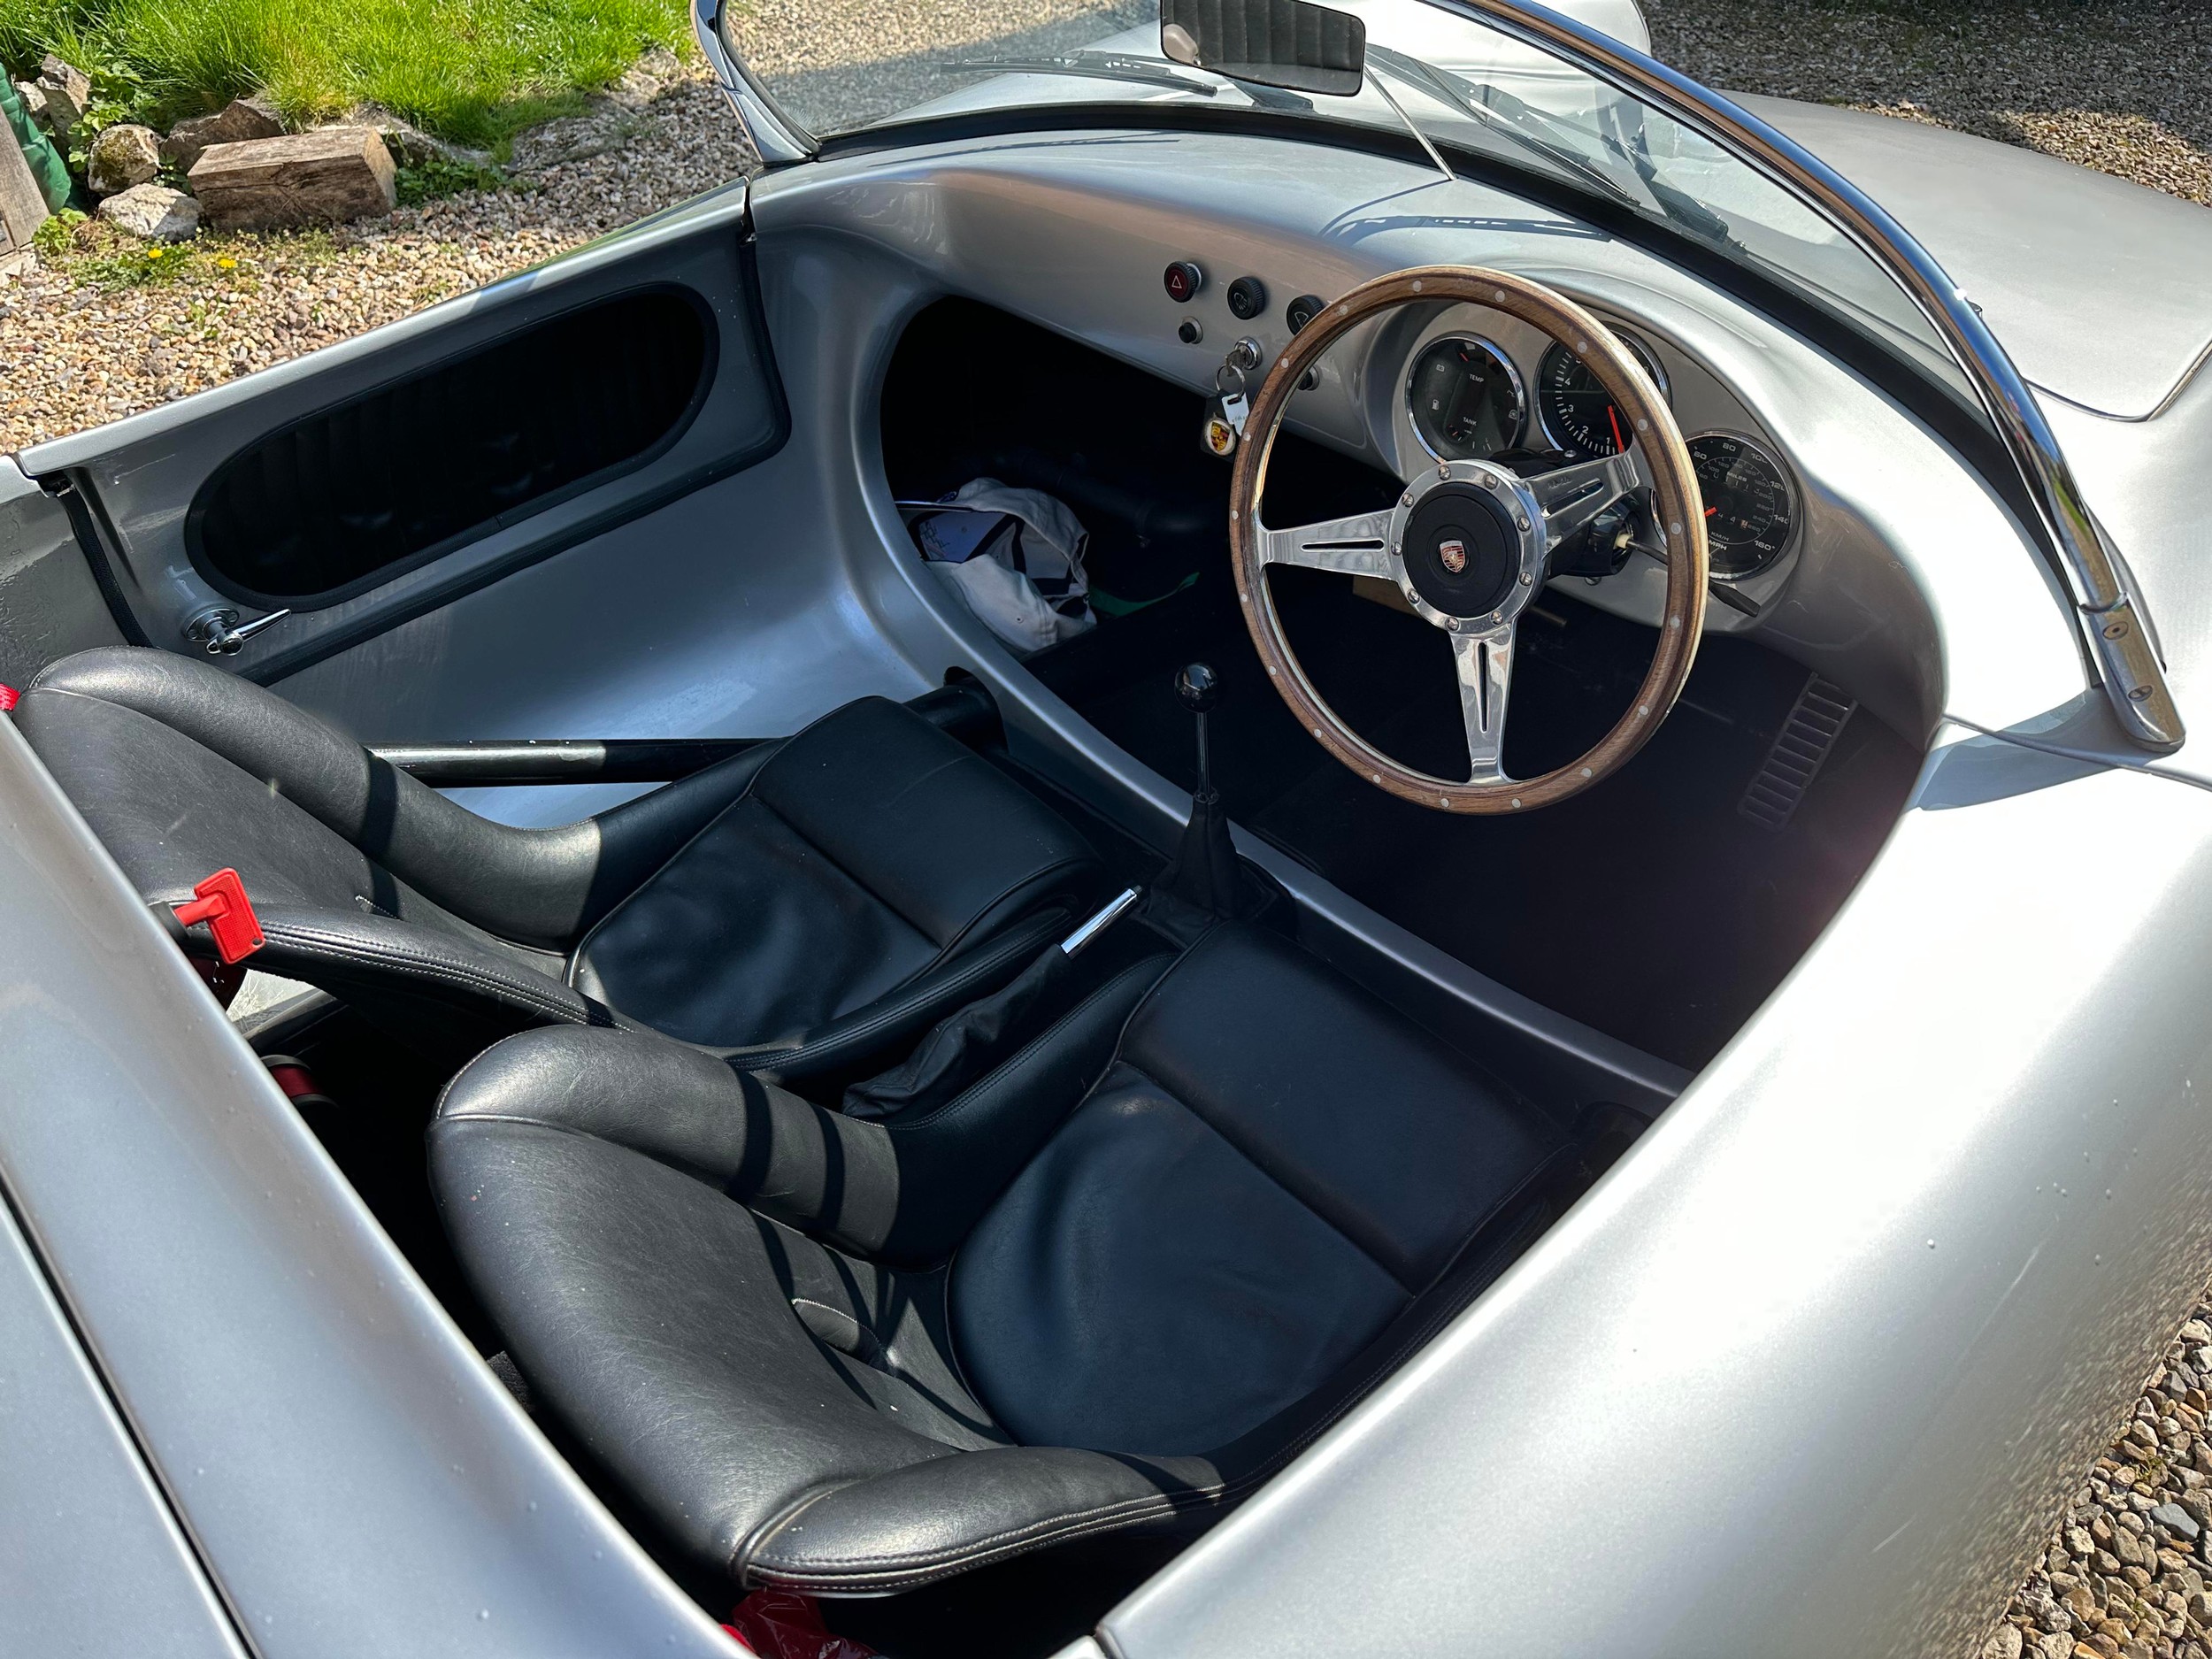 1996 TRAC Technic Porsche 550 Spyder Replica Registration Number Q260 ABL Metallic silver with a - Image 19 of 65